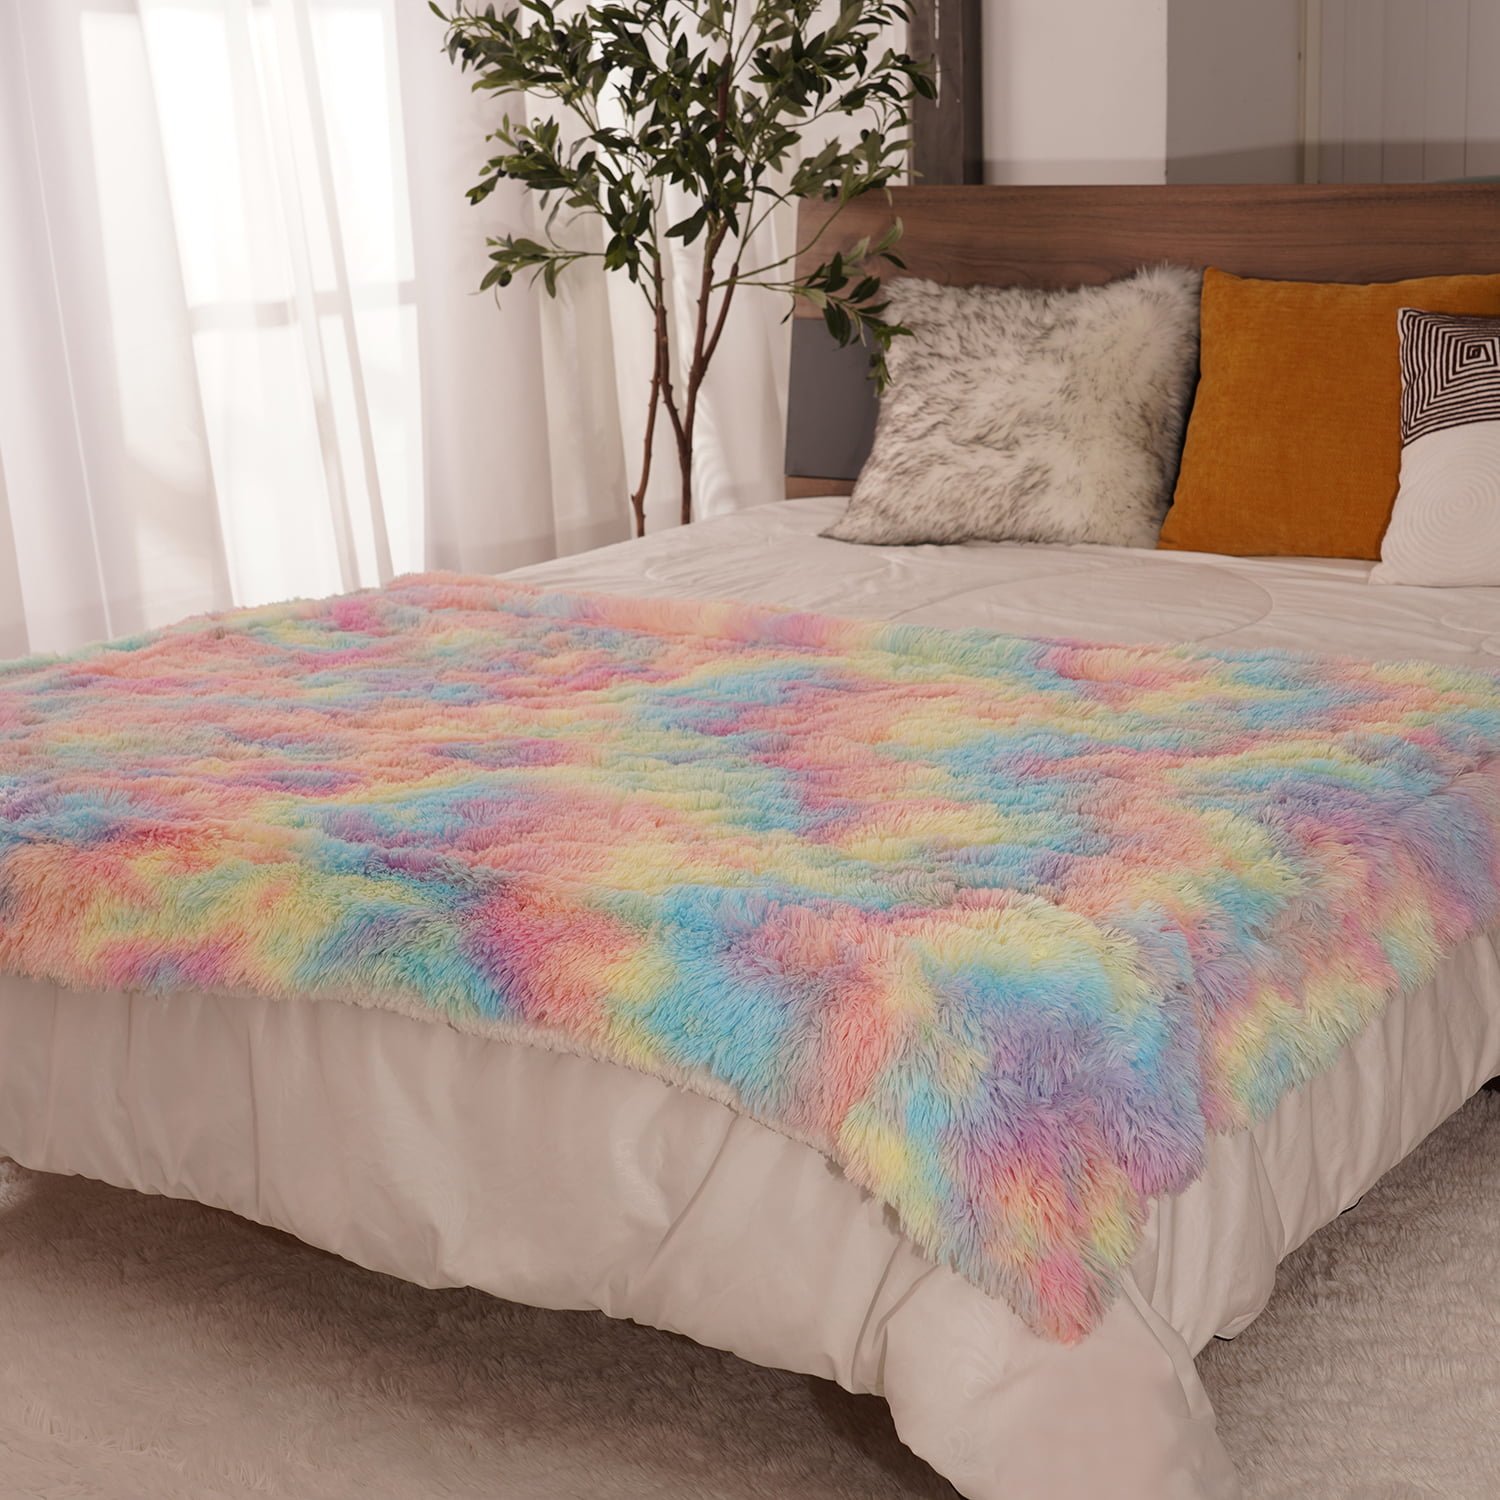  Let Freedom Ring Flannel Blanket Double-Sided Throw Blanket  Fluffy Quilt Soft and Cozy Blanket for Couch Sofa Bed Office 60 X 80 :  לבית ולמטבח